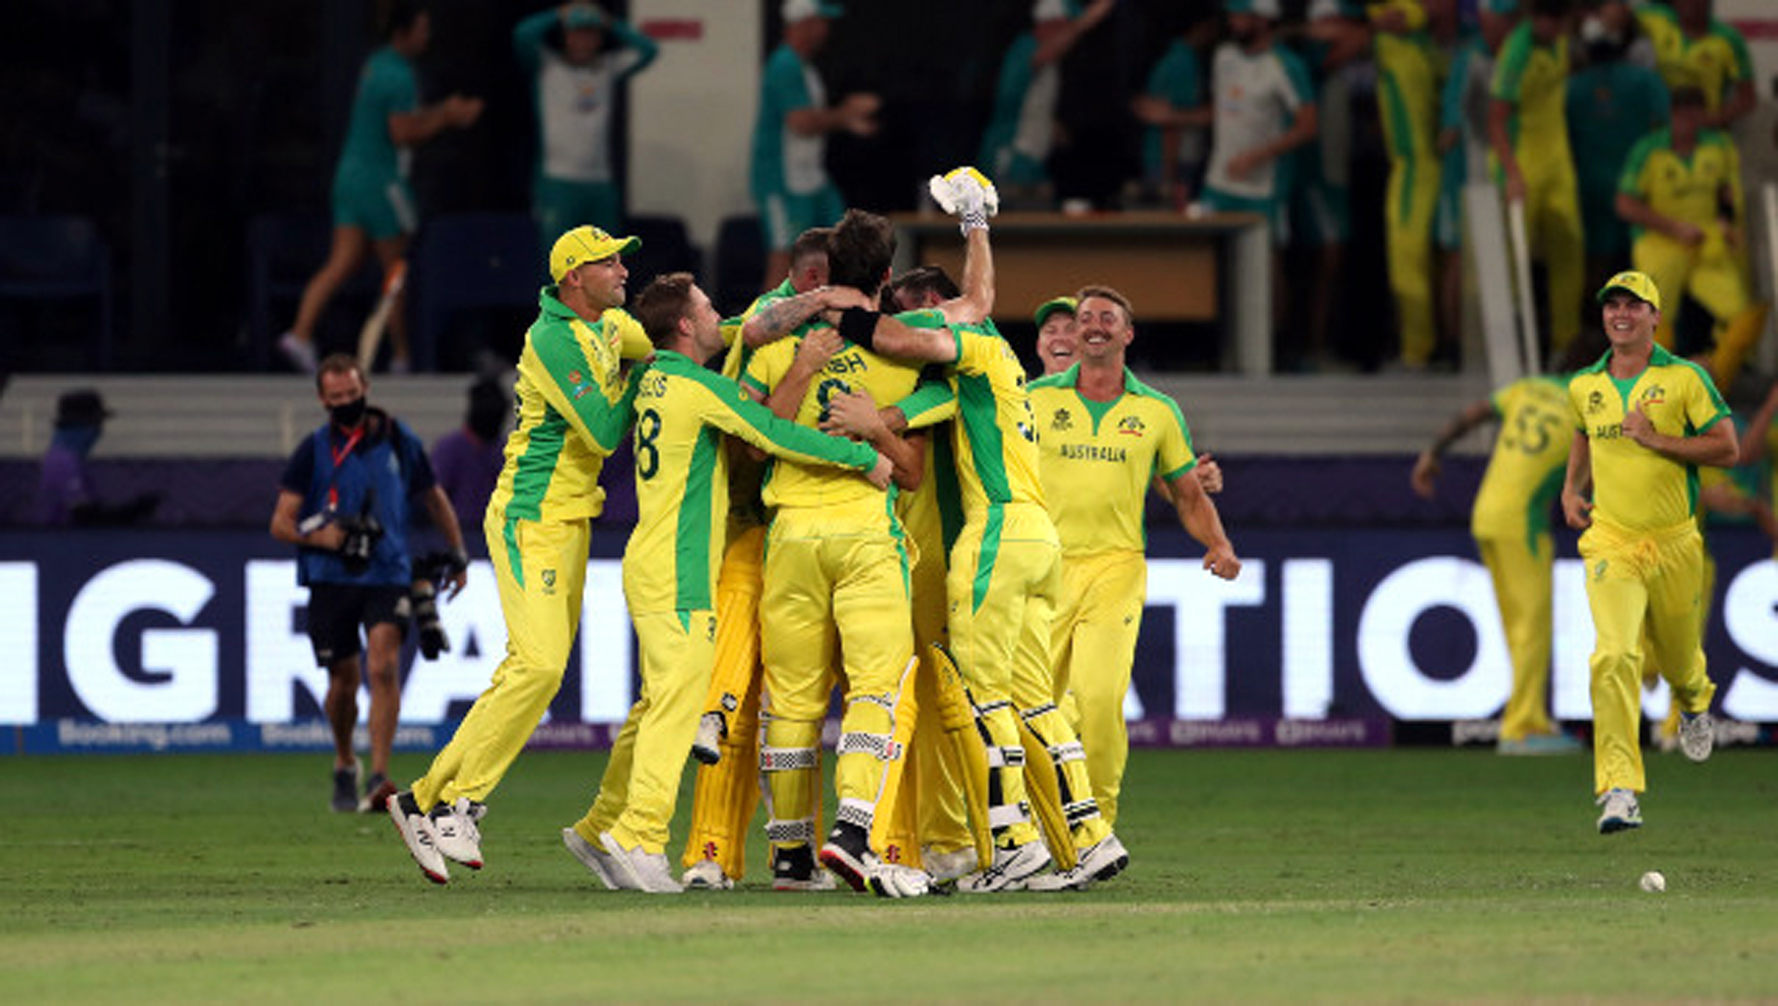 Australian players celebrating victory over New Zealand during T20 World Cup final match at Dubai on Sunday.